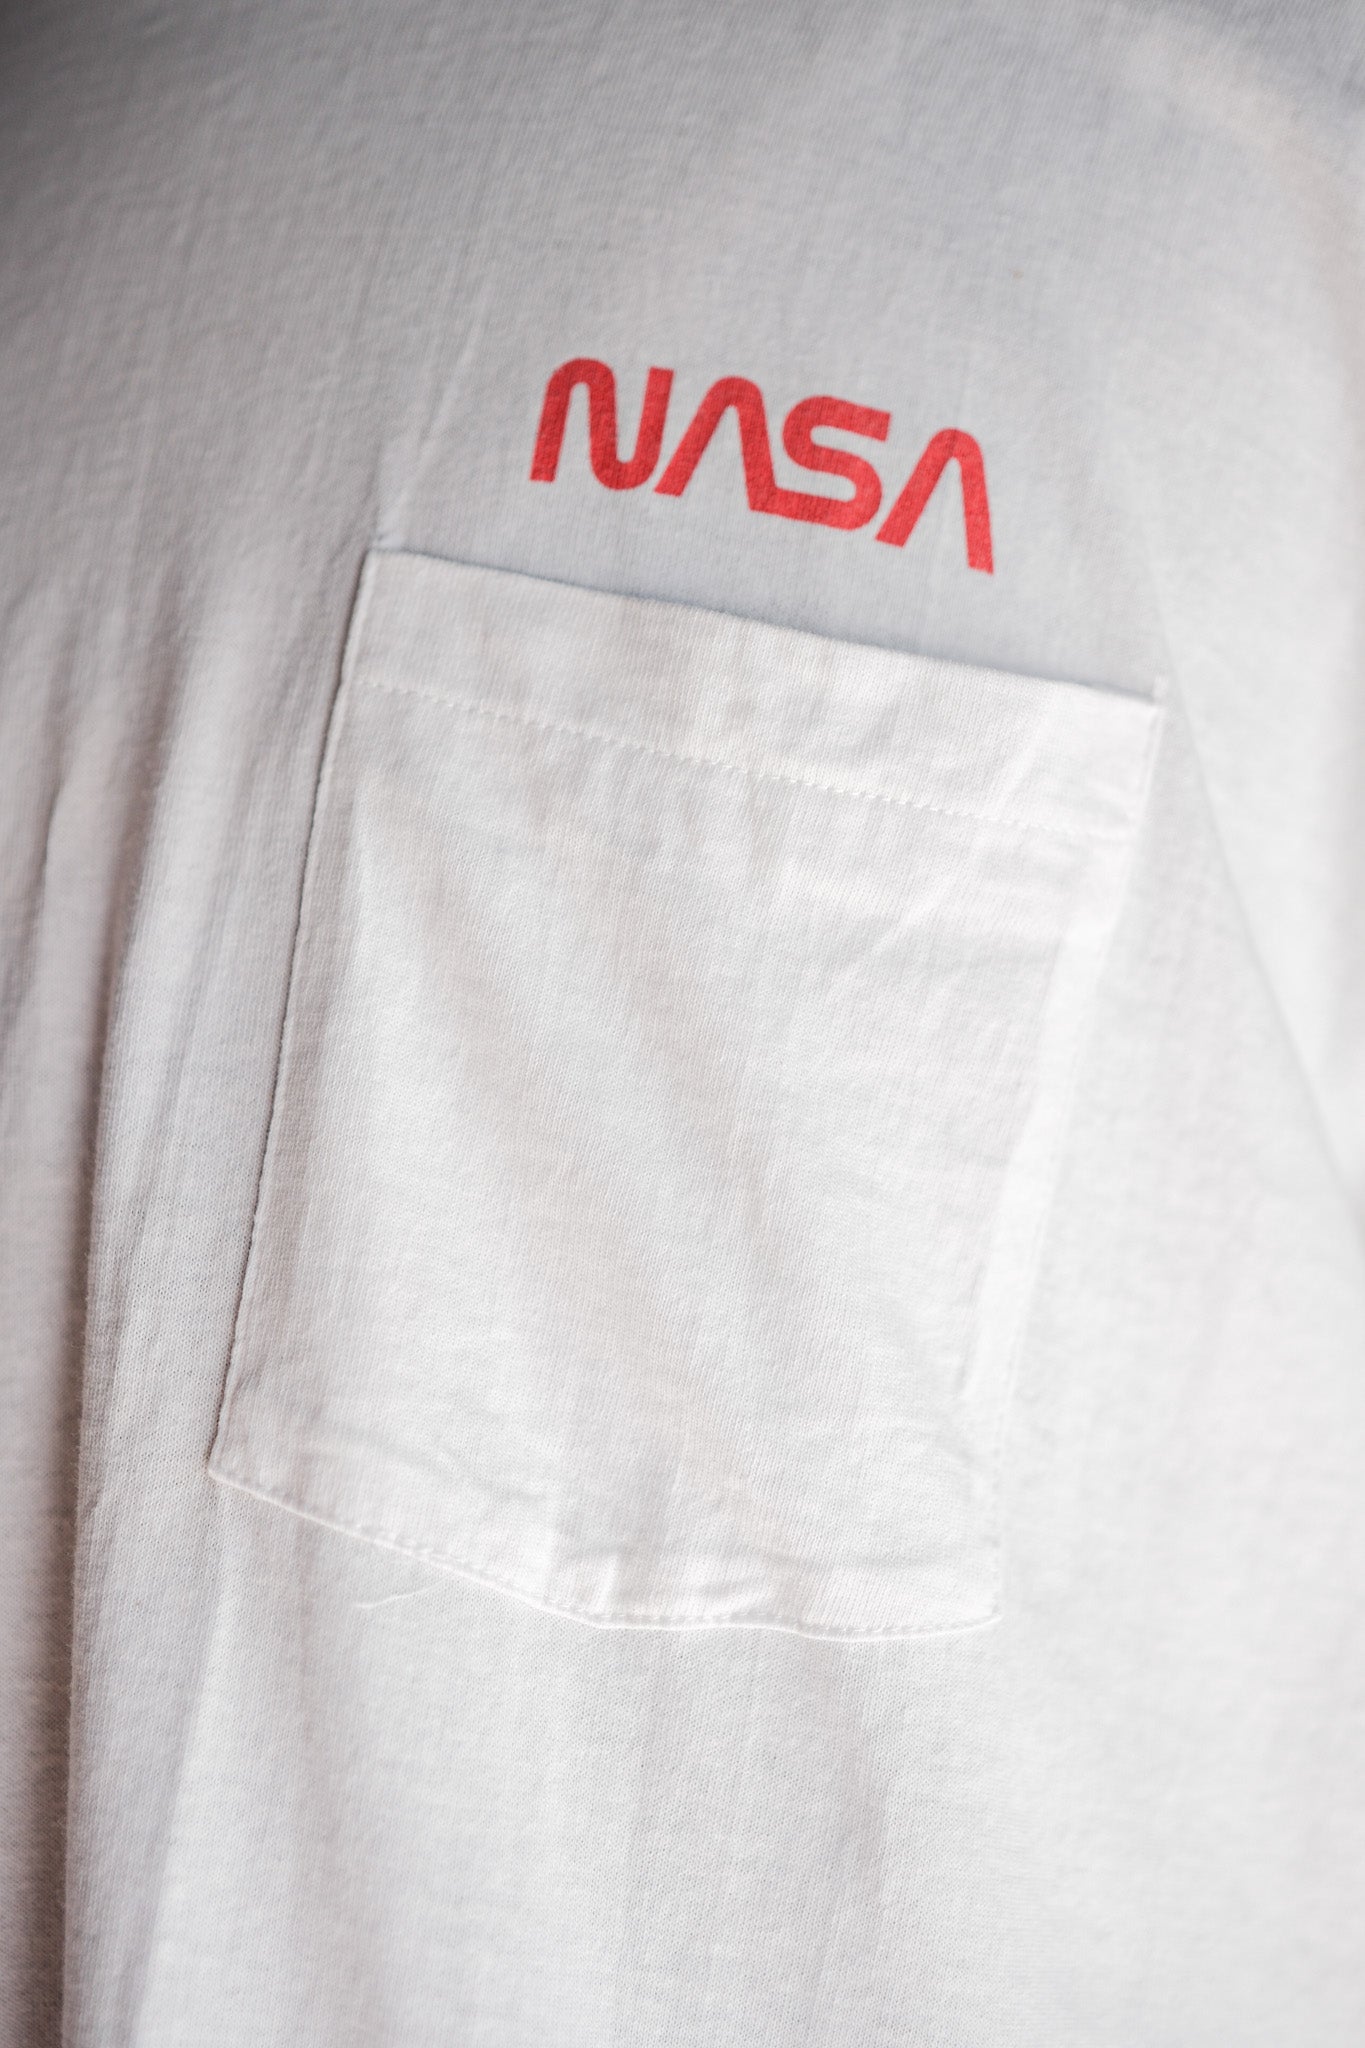 [~ 90's] Vintage Federal Print T-shirt size.xl "NASA" "Made in U.S.A."